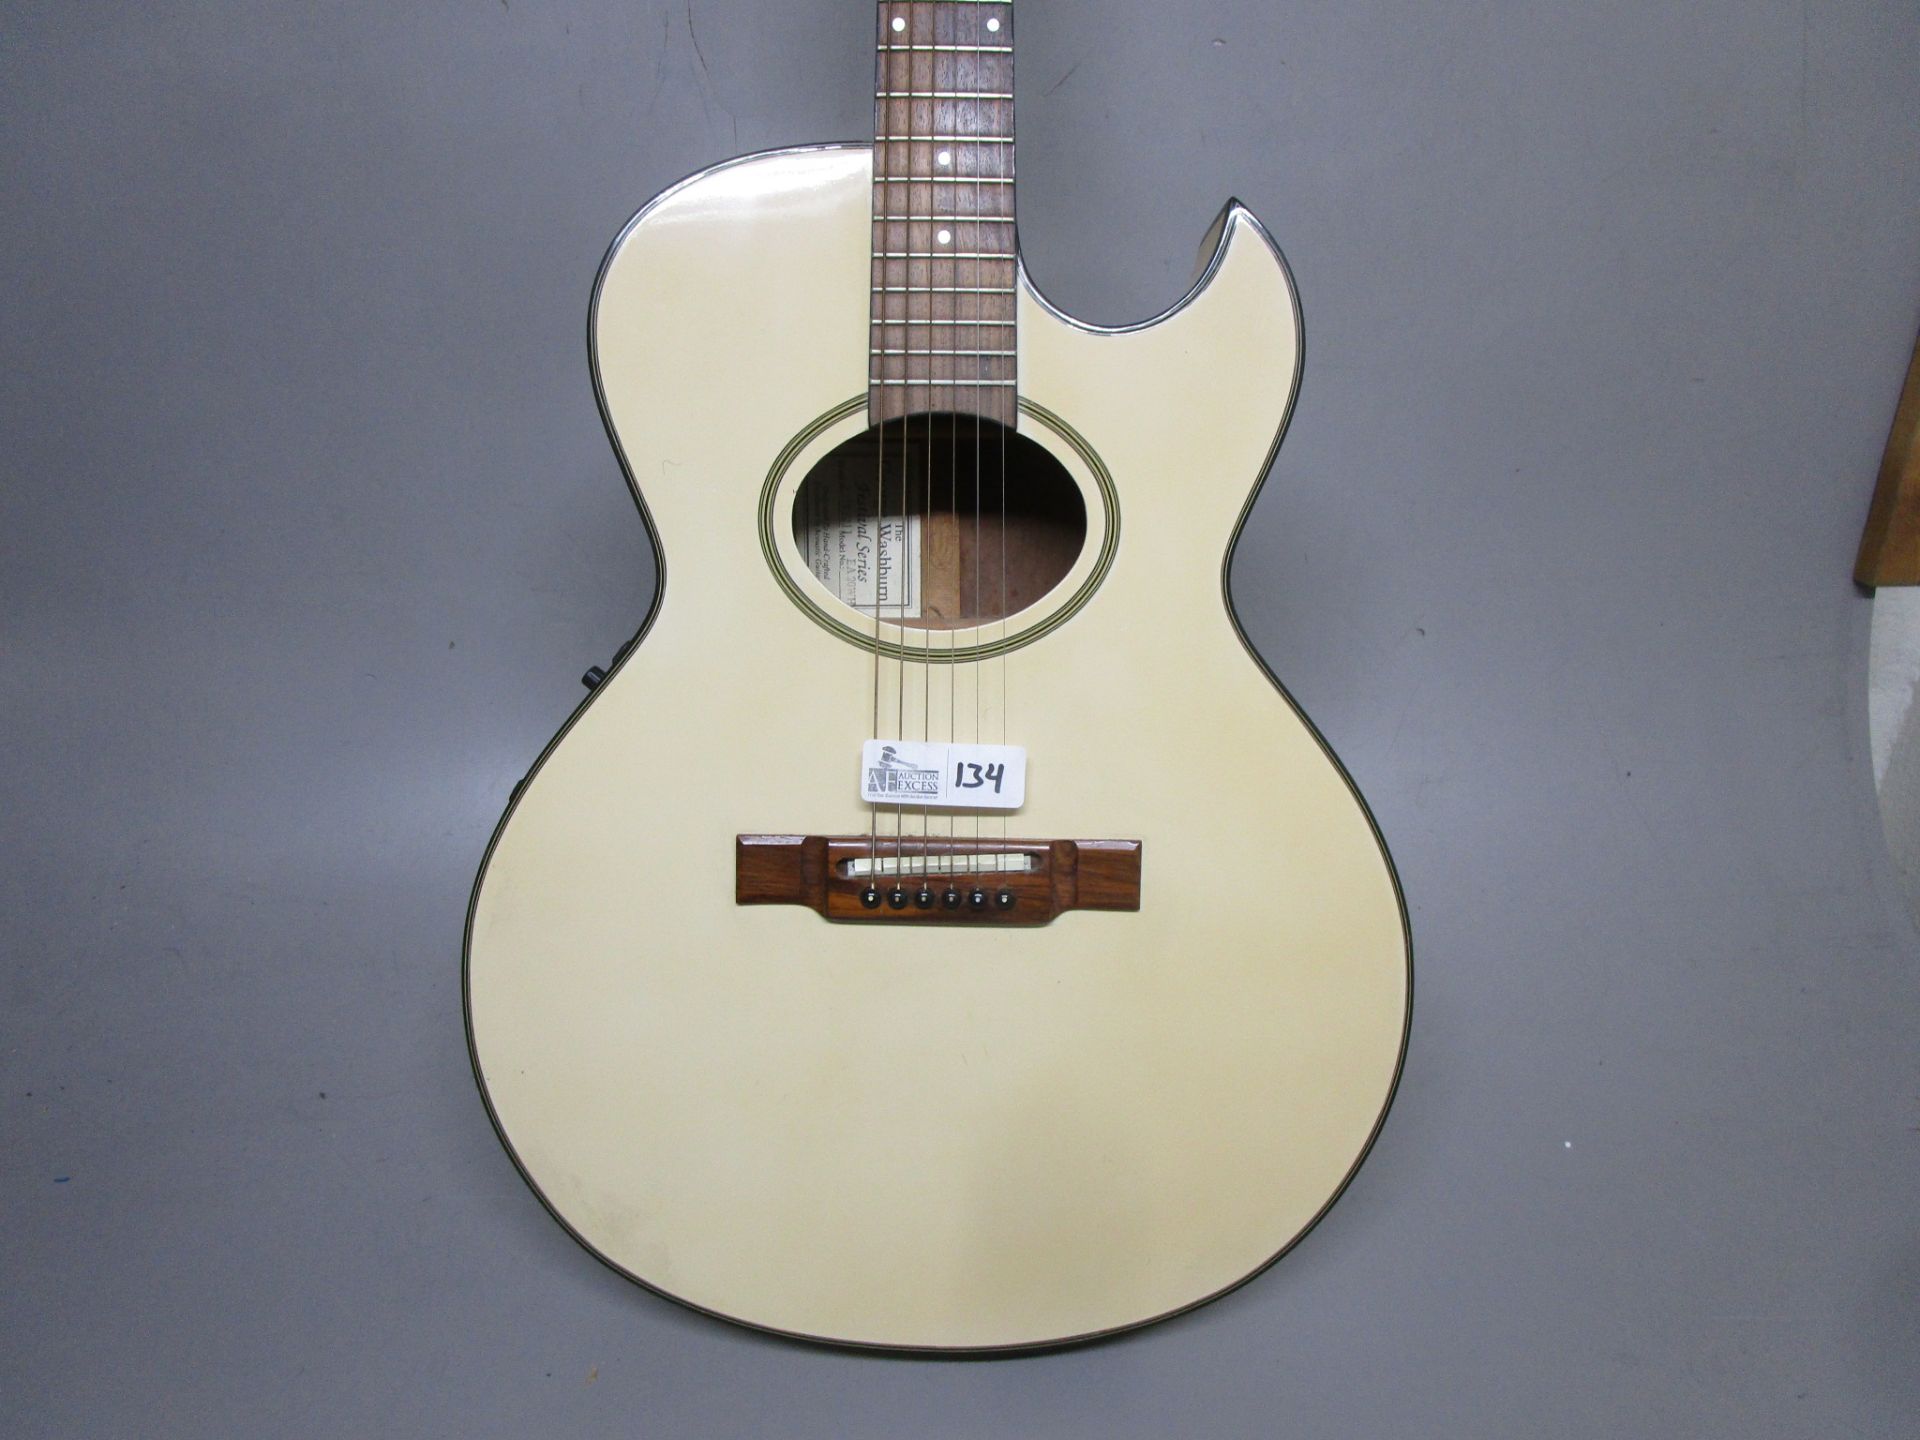 WASHBURN EQUIS II MODEL EA 20WH FESTIVAL SERIES ACOUSTIC/ELECTRIC GUITAR WITH CASE - Image 3 of 9